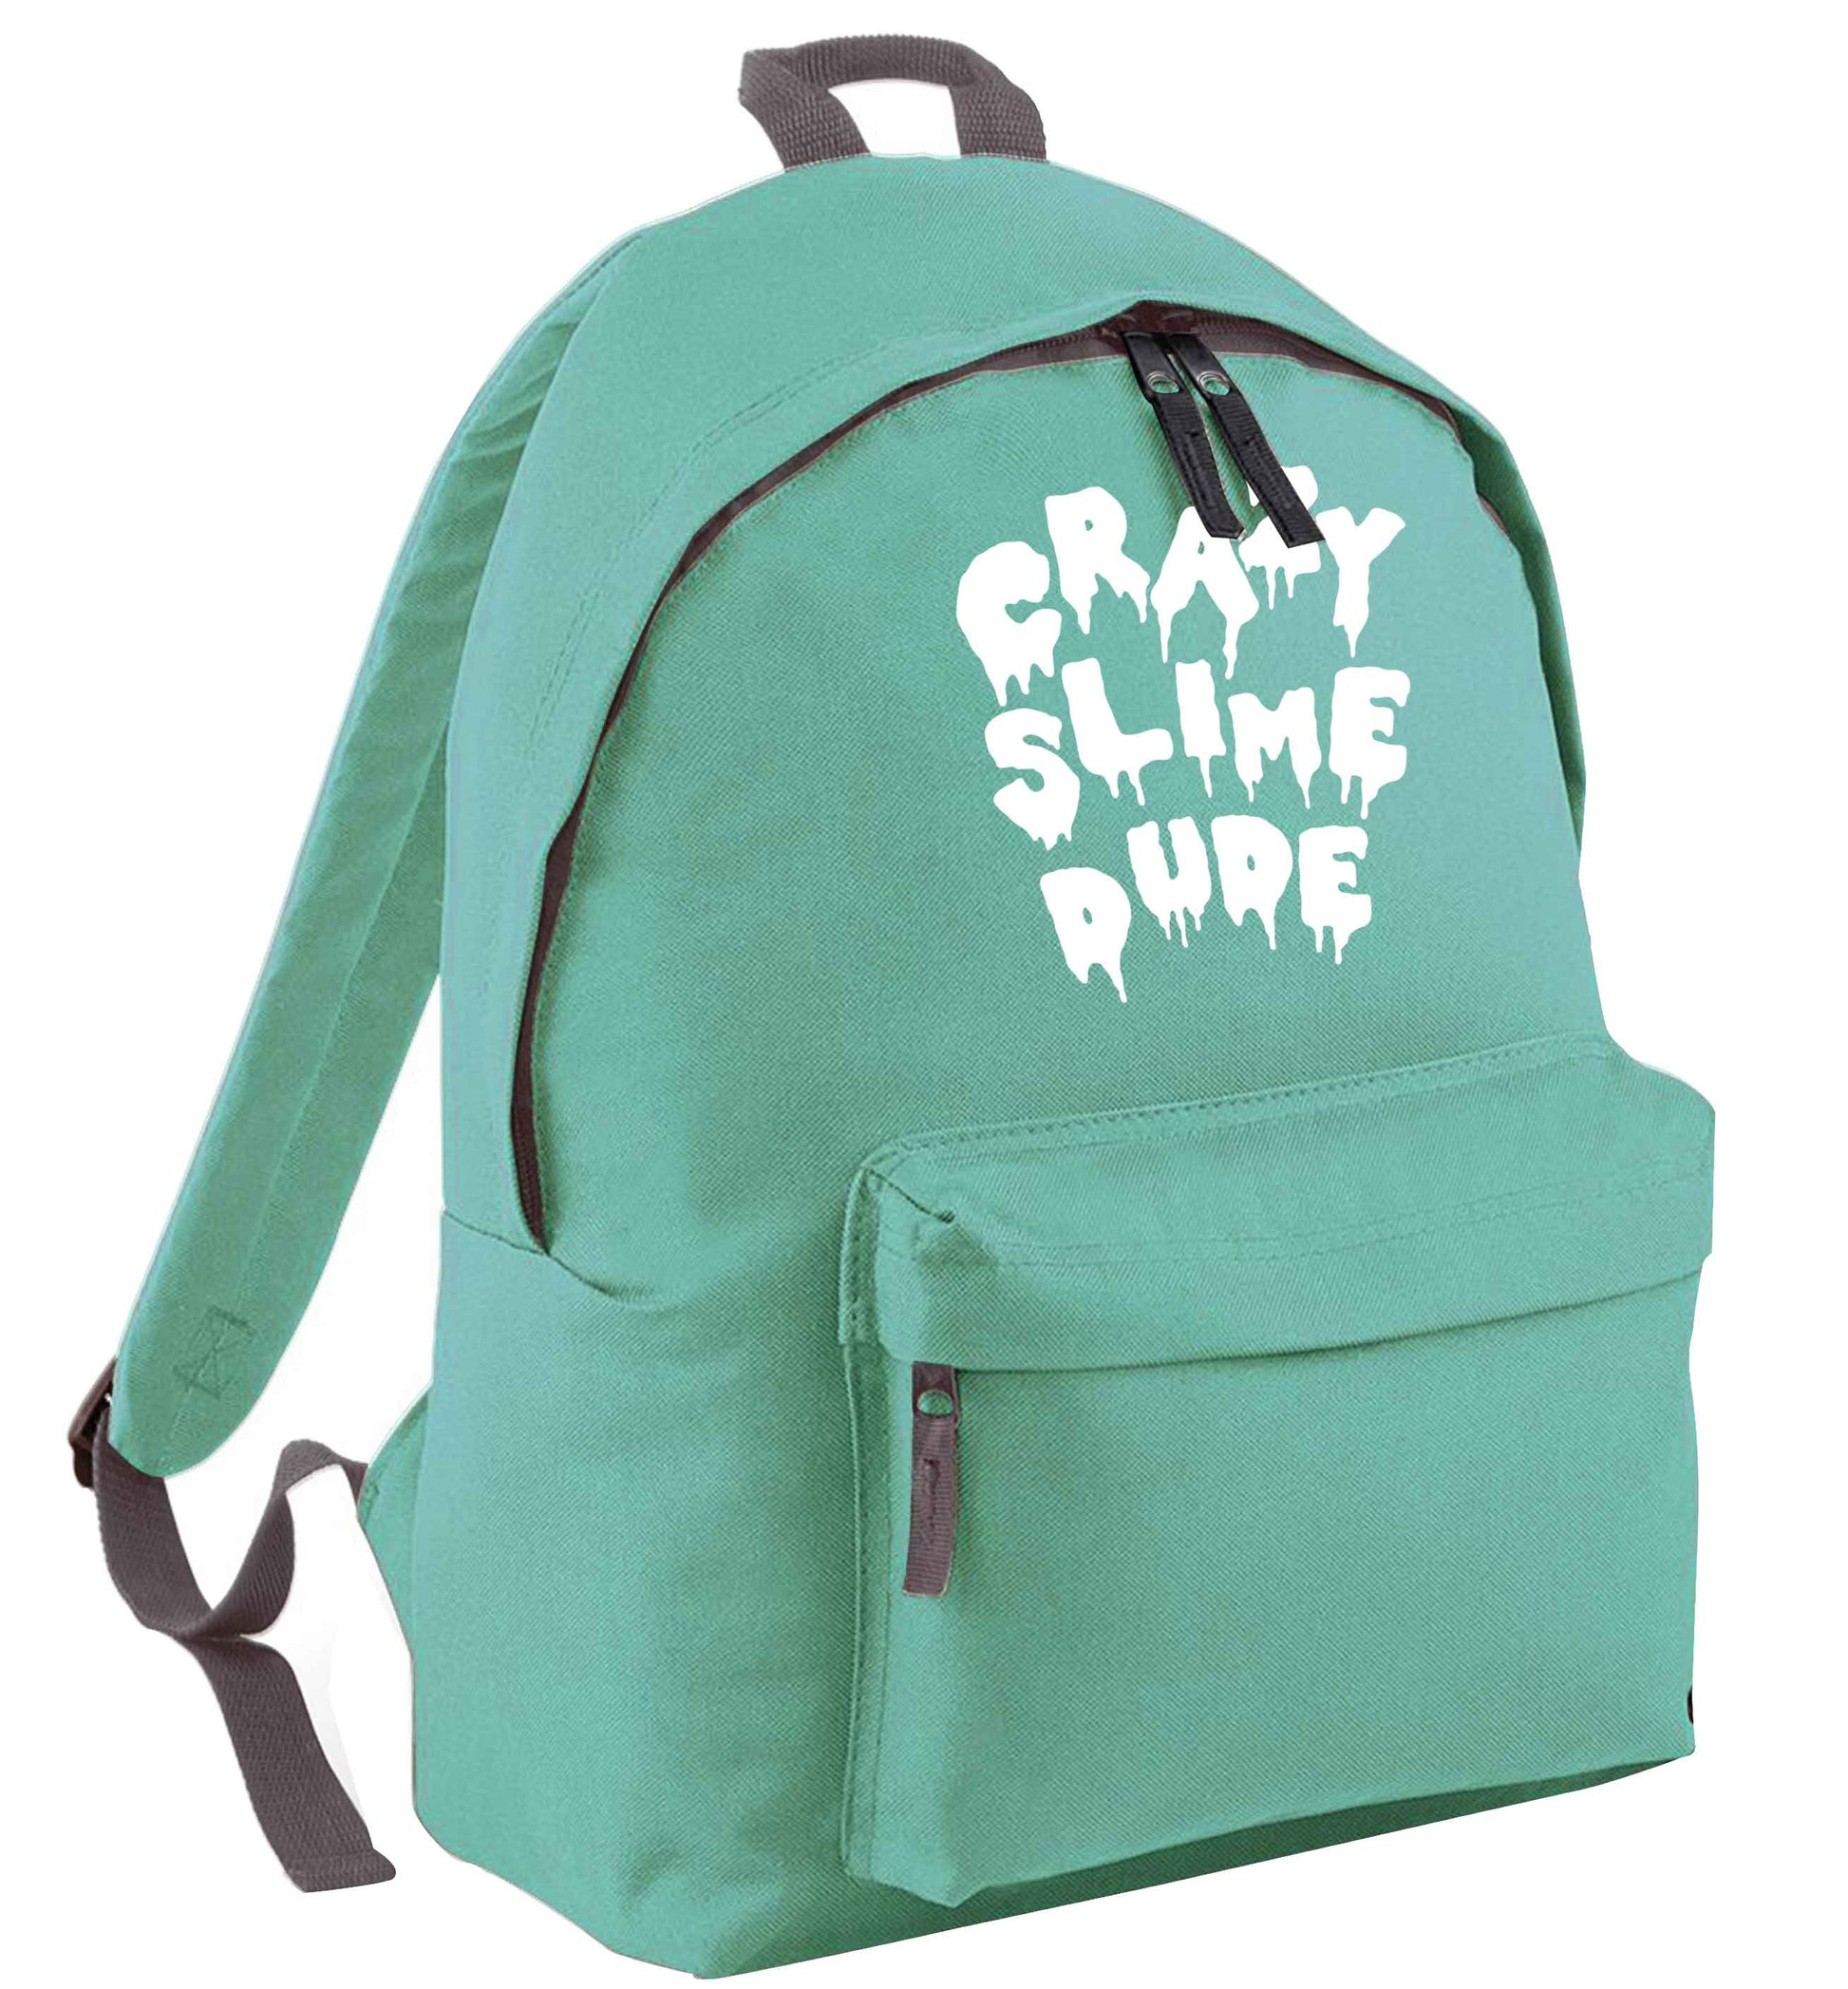 Crazy slime dude mint adults backpack